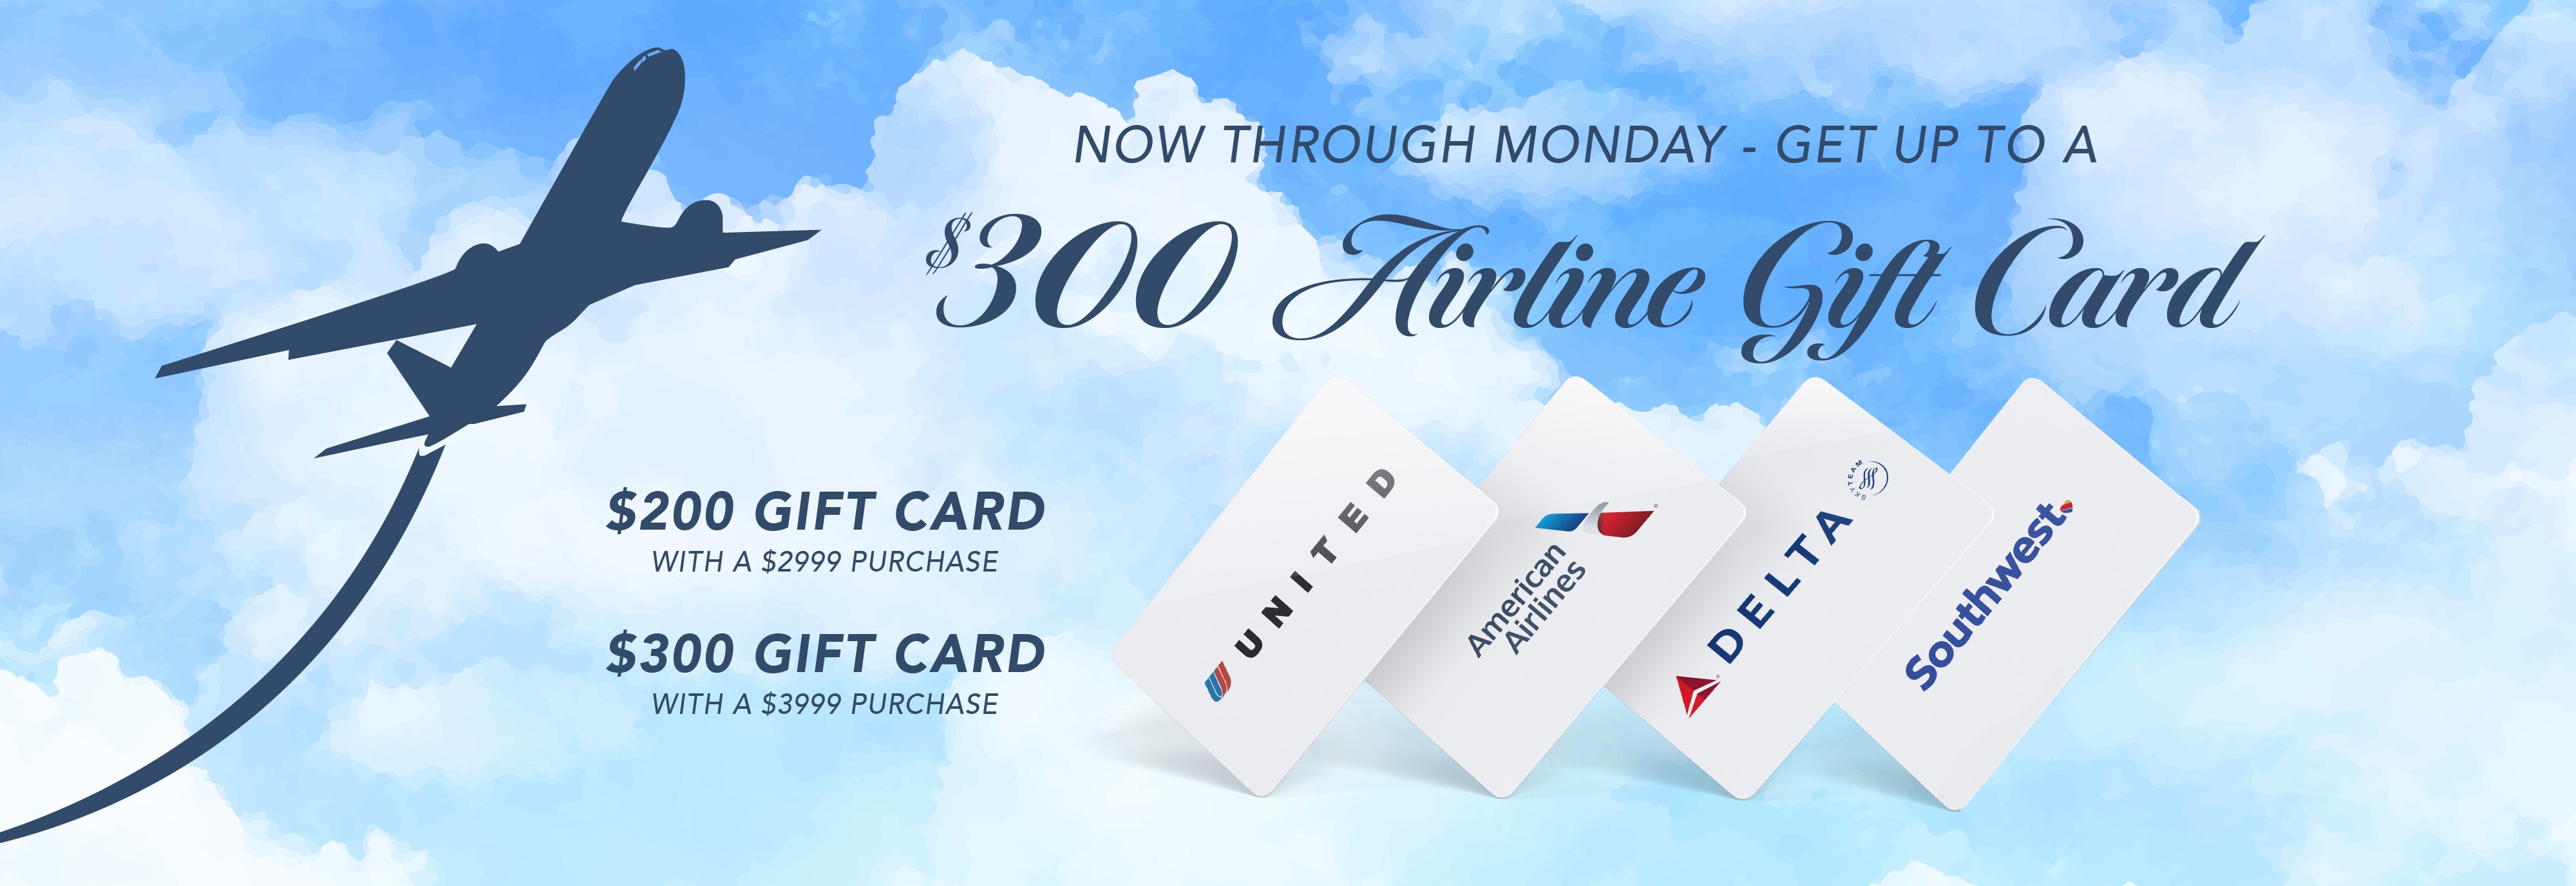 Presidents Day Airline Offer